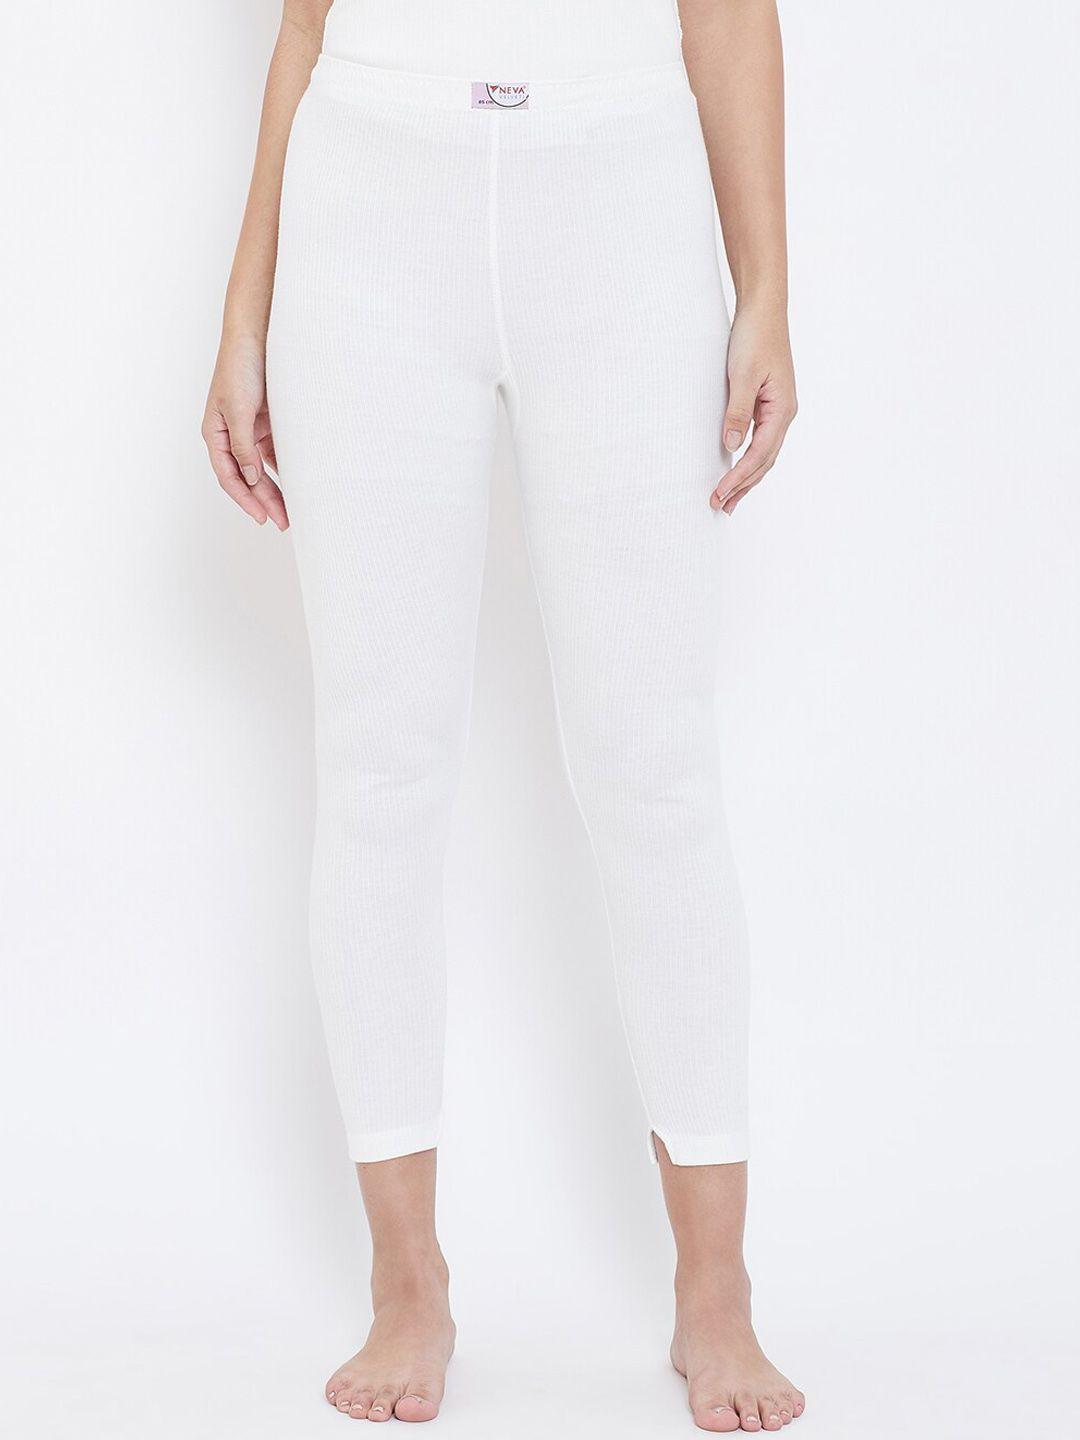 neva-women-off-white-patterned-three-fourth-length-thermal-bottoms